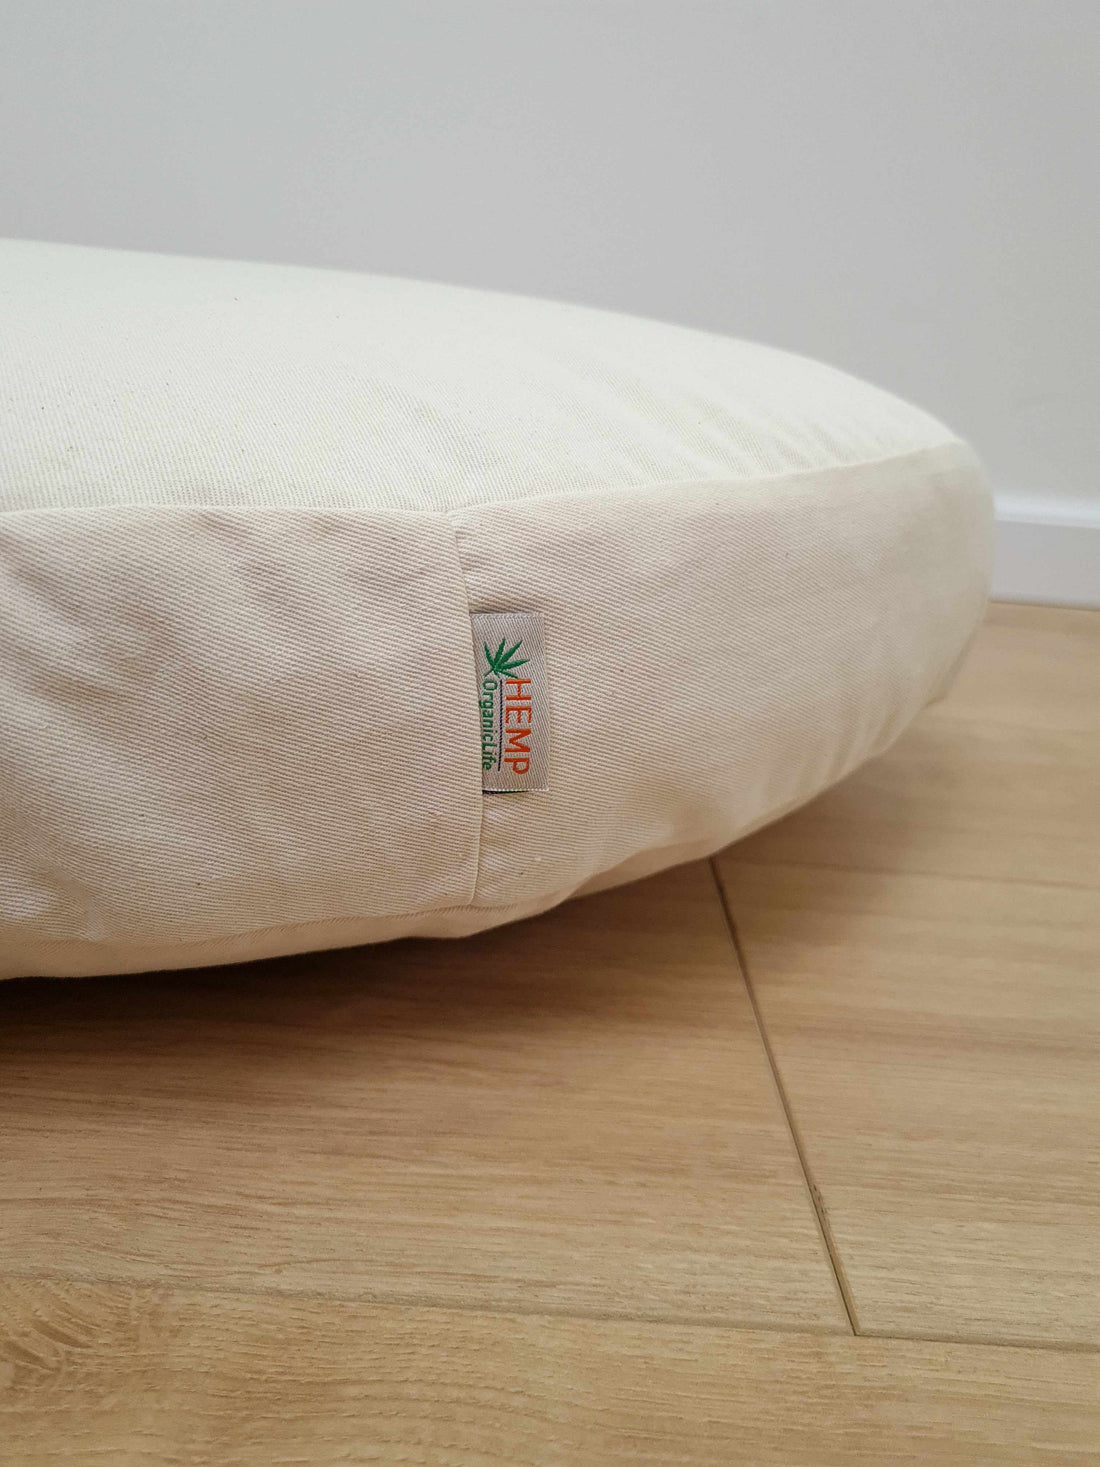 Custom Organic Cotton Seat Cushion with Removable Cover